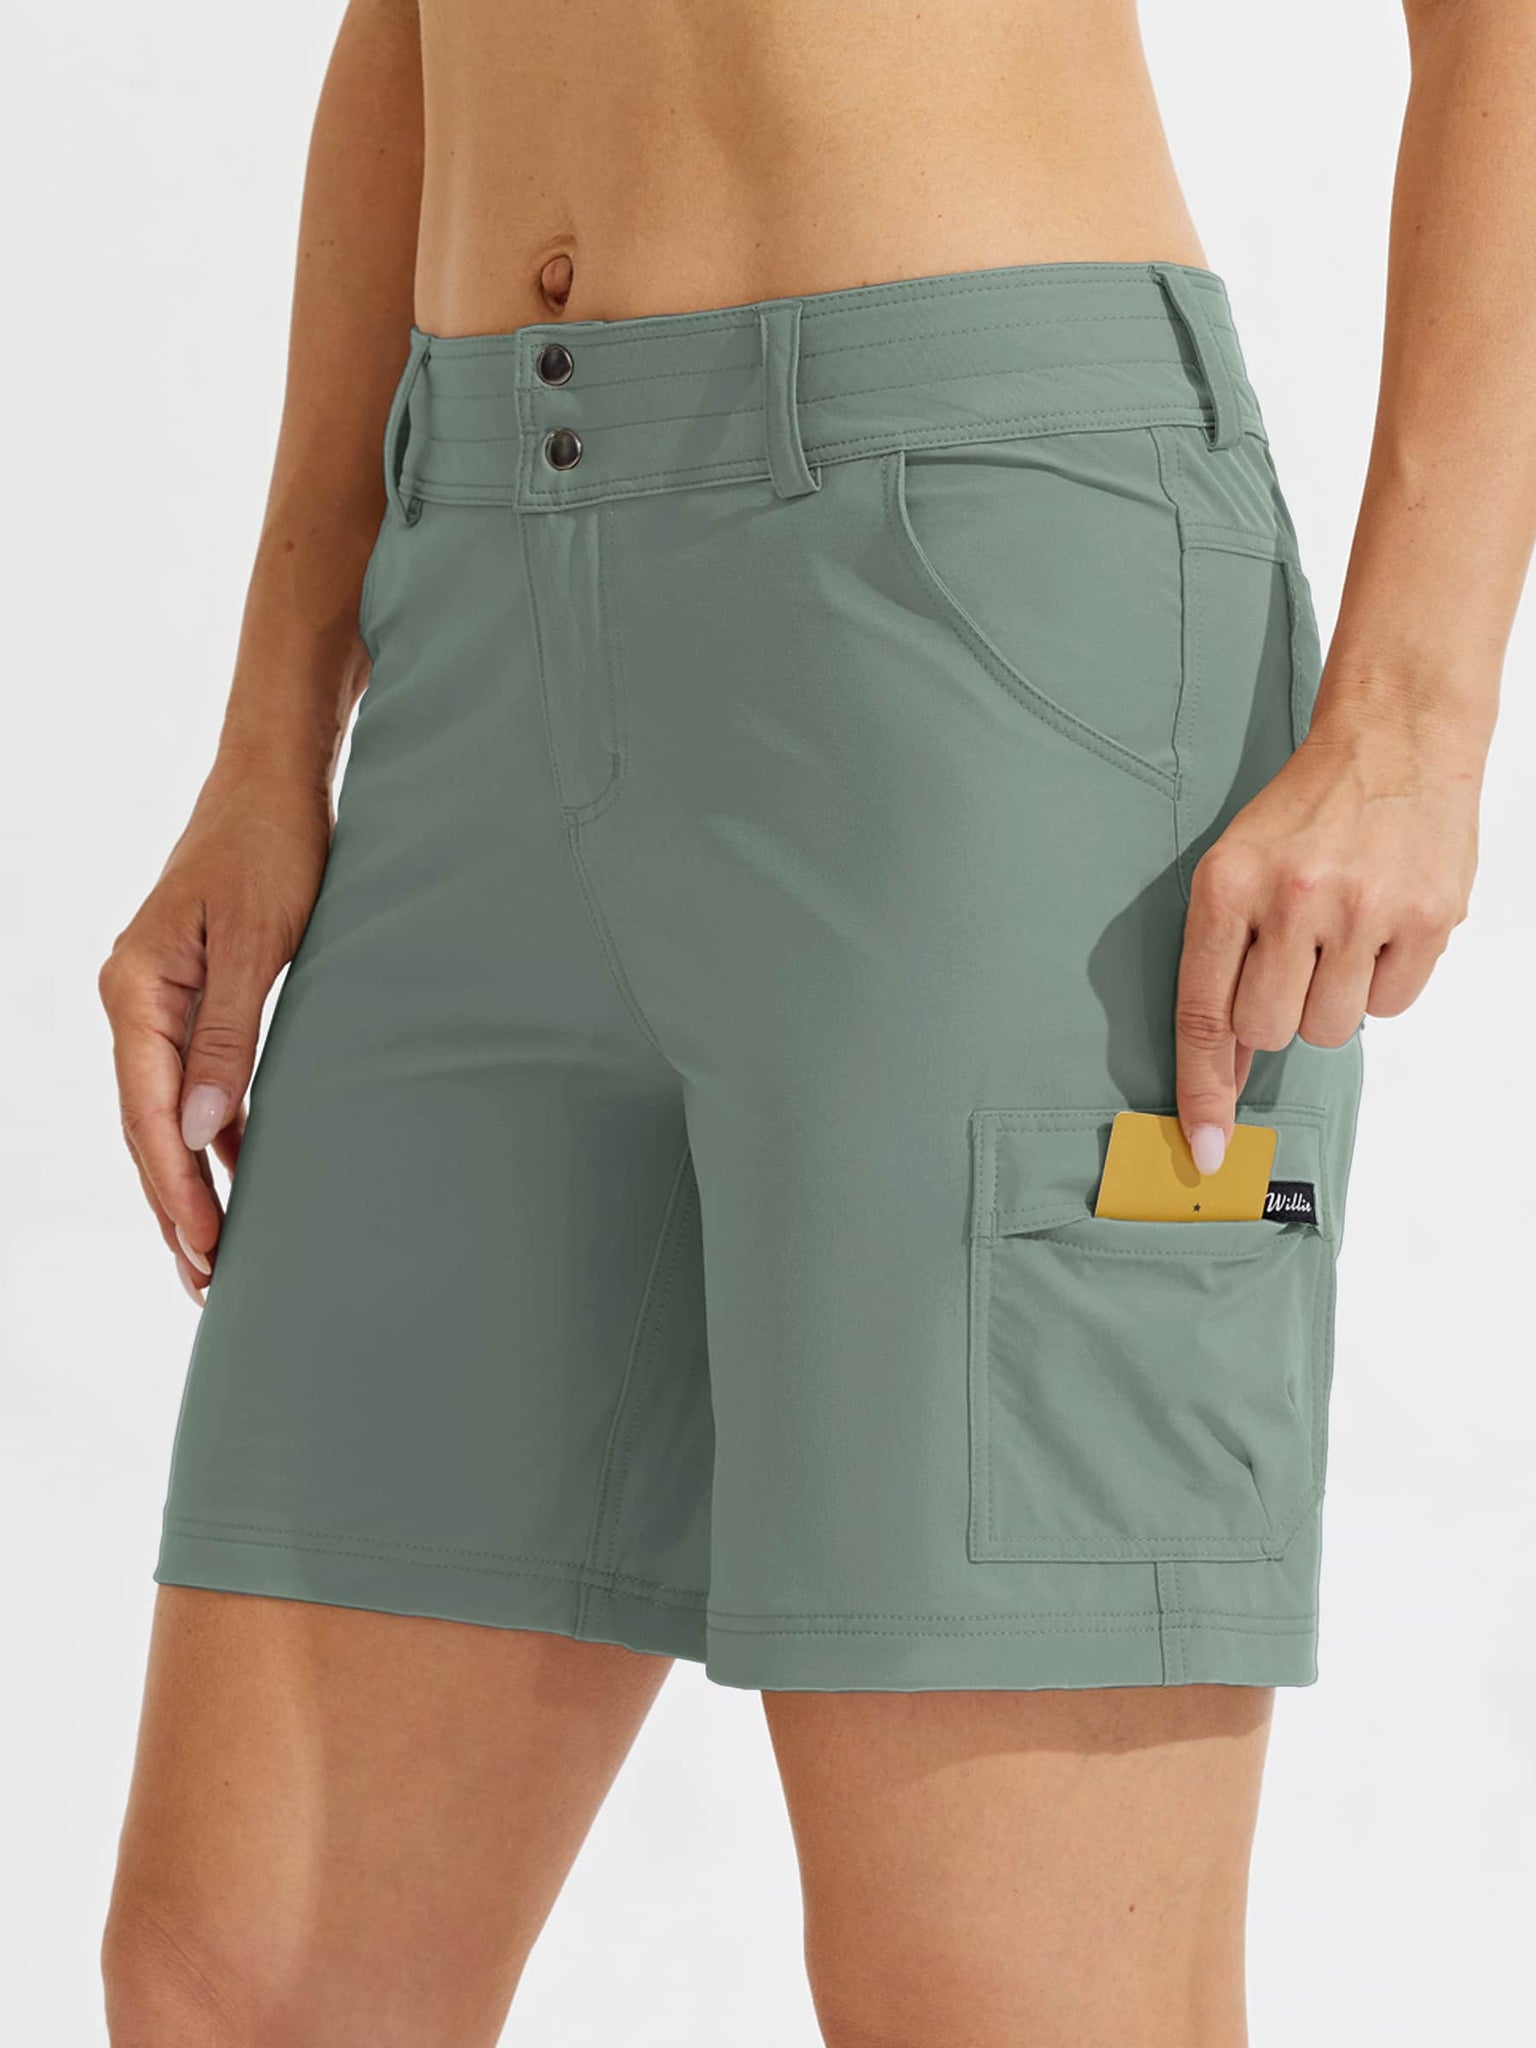 Women's Outdoor Pro Shorts Green_hover_model